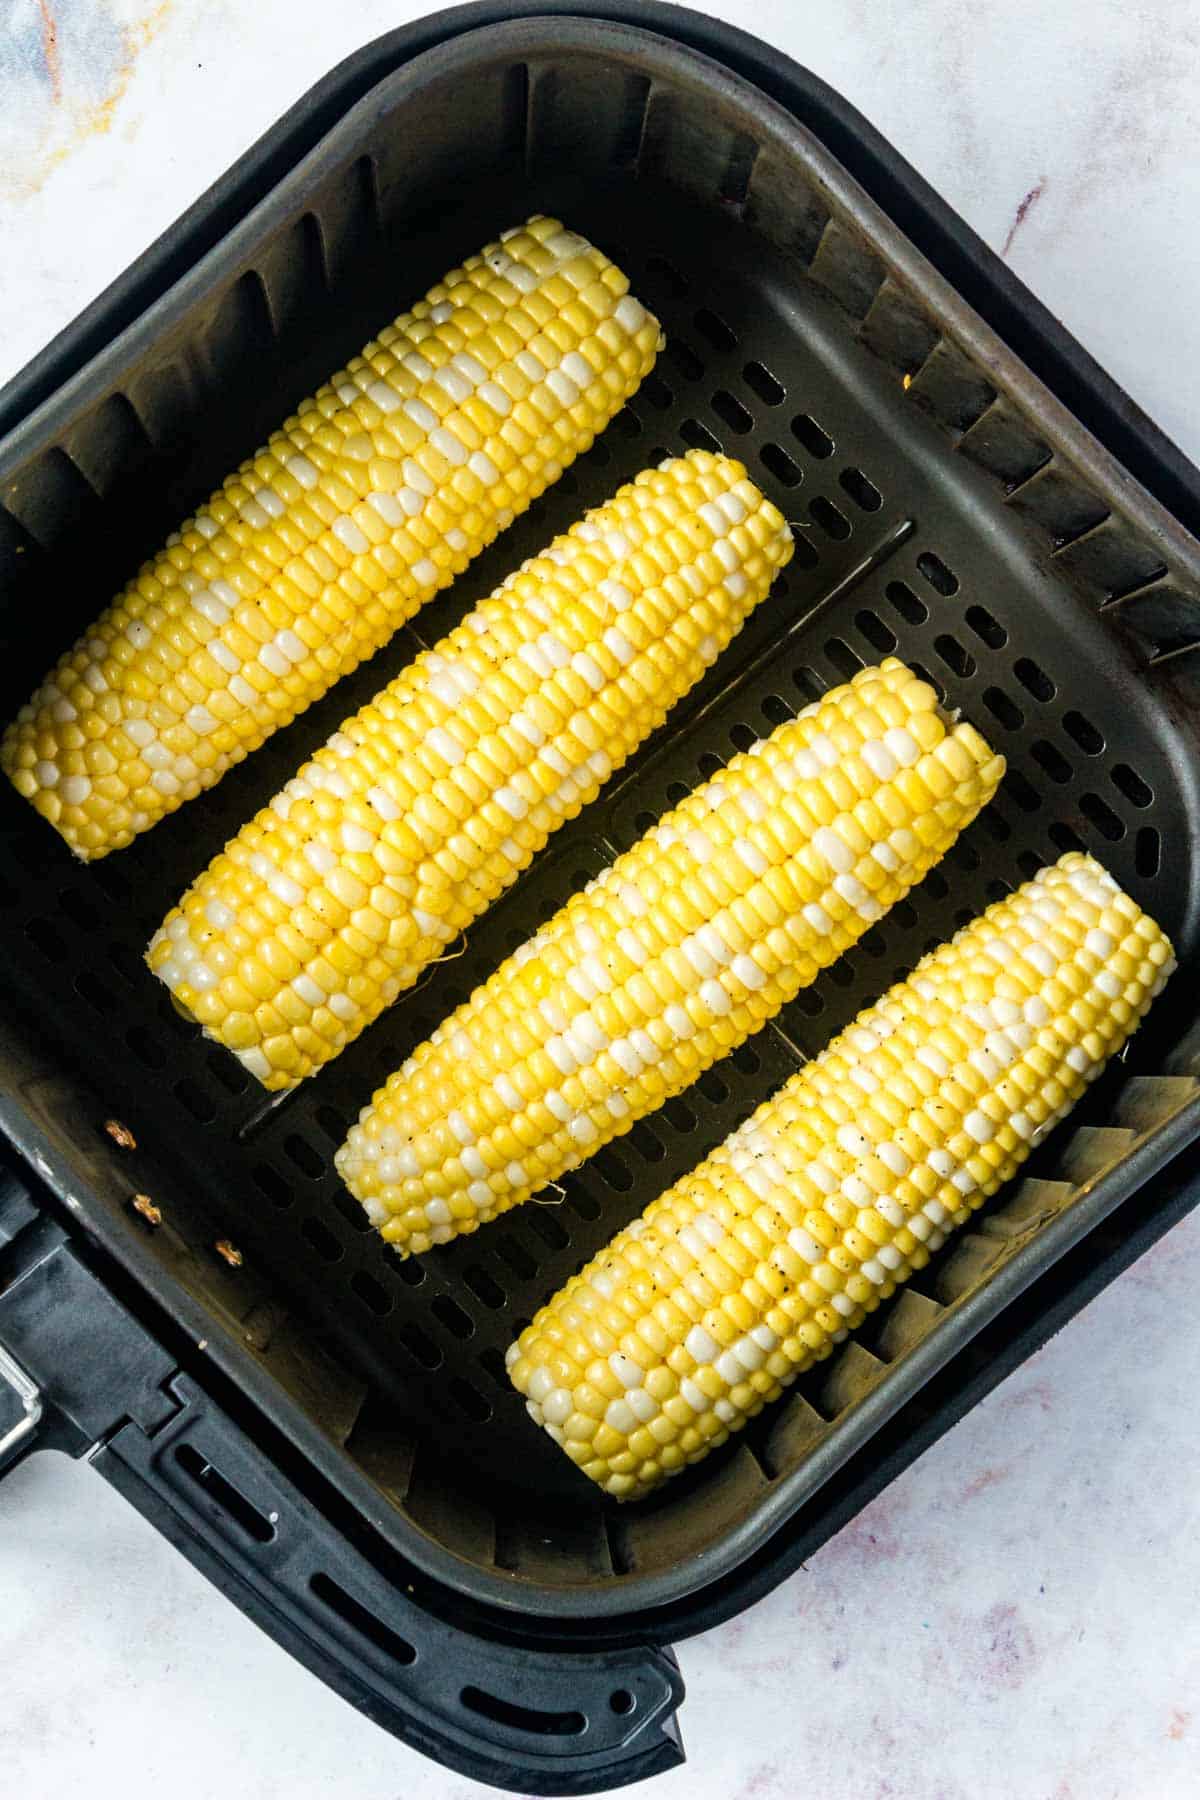 Top view of seasoned corn on the cob inside the air fryer.